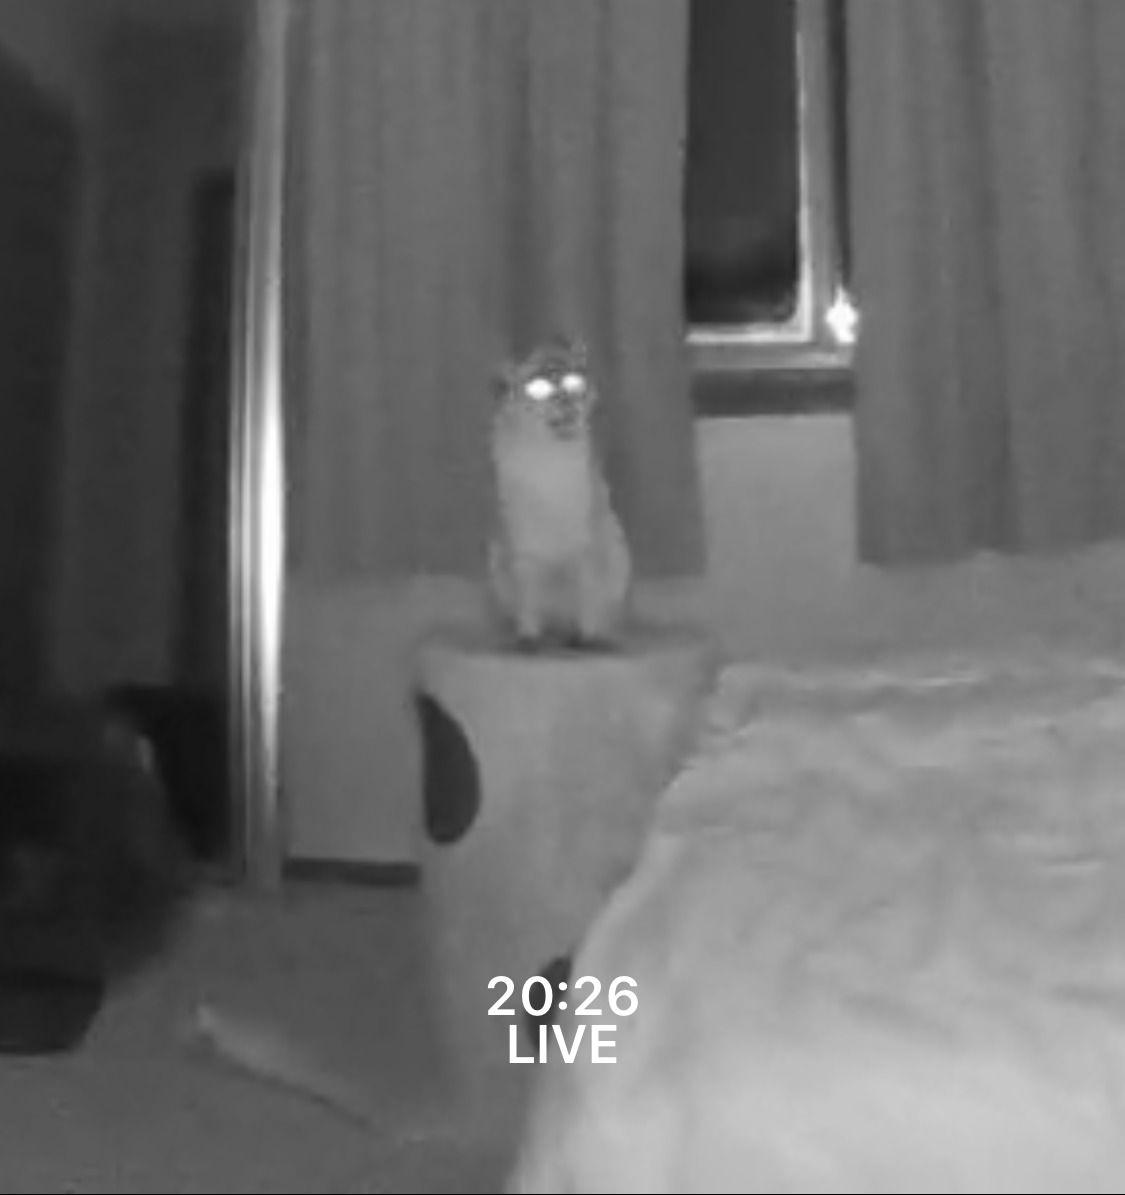 A night-vision image of a cat sitting on a piece of furniture with its eyes glowing and mouth open